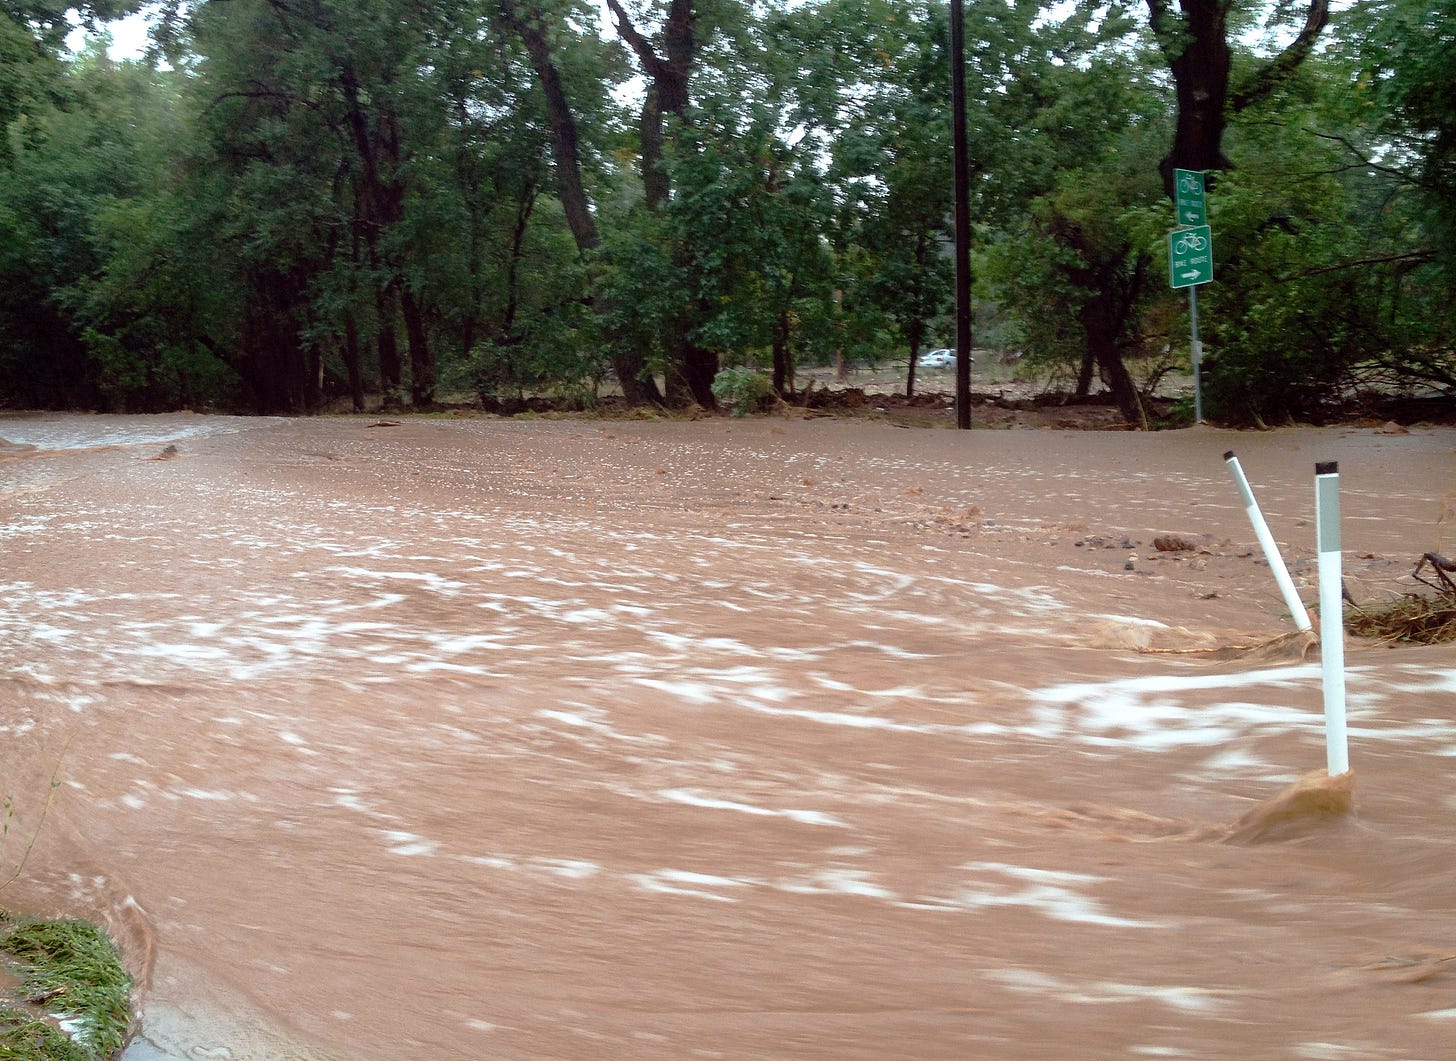 Muddy brown water fills and flows down a street lined with trees